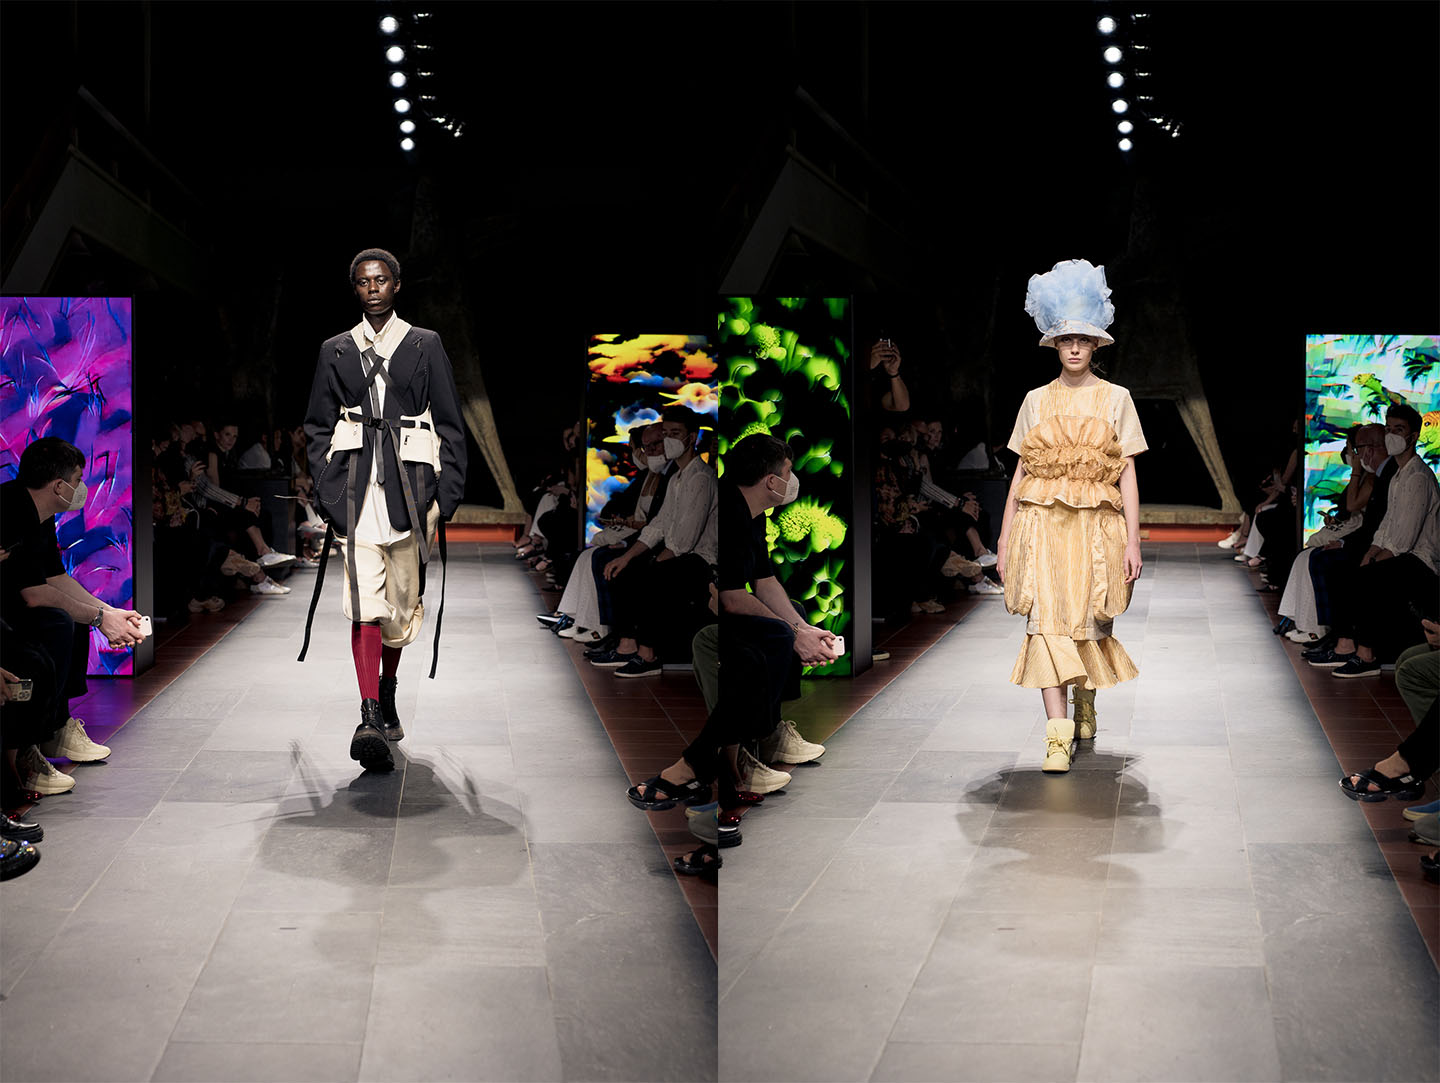 From left to right, outfits by Nicola De Piano and Sana Krishna